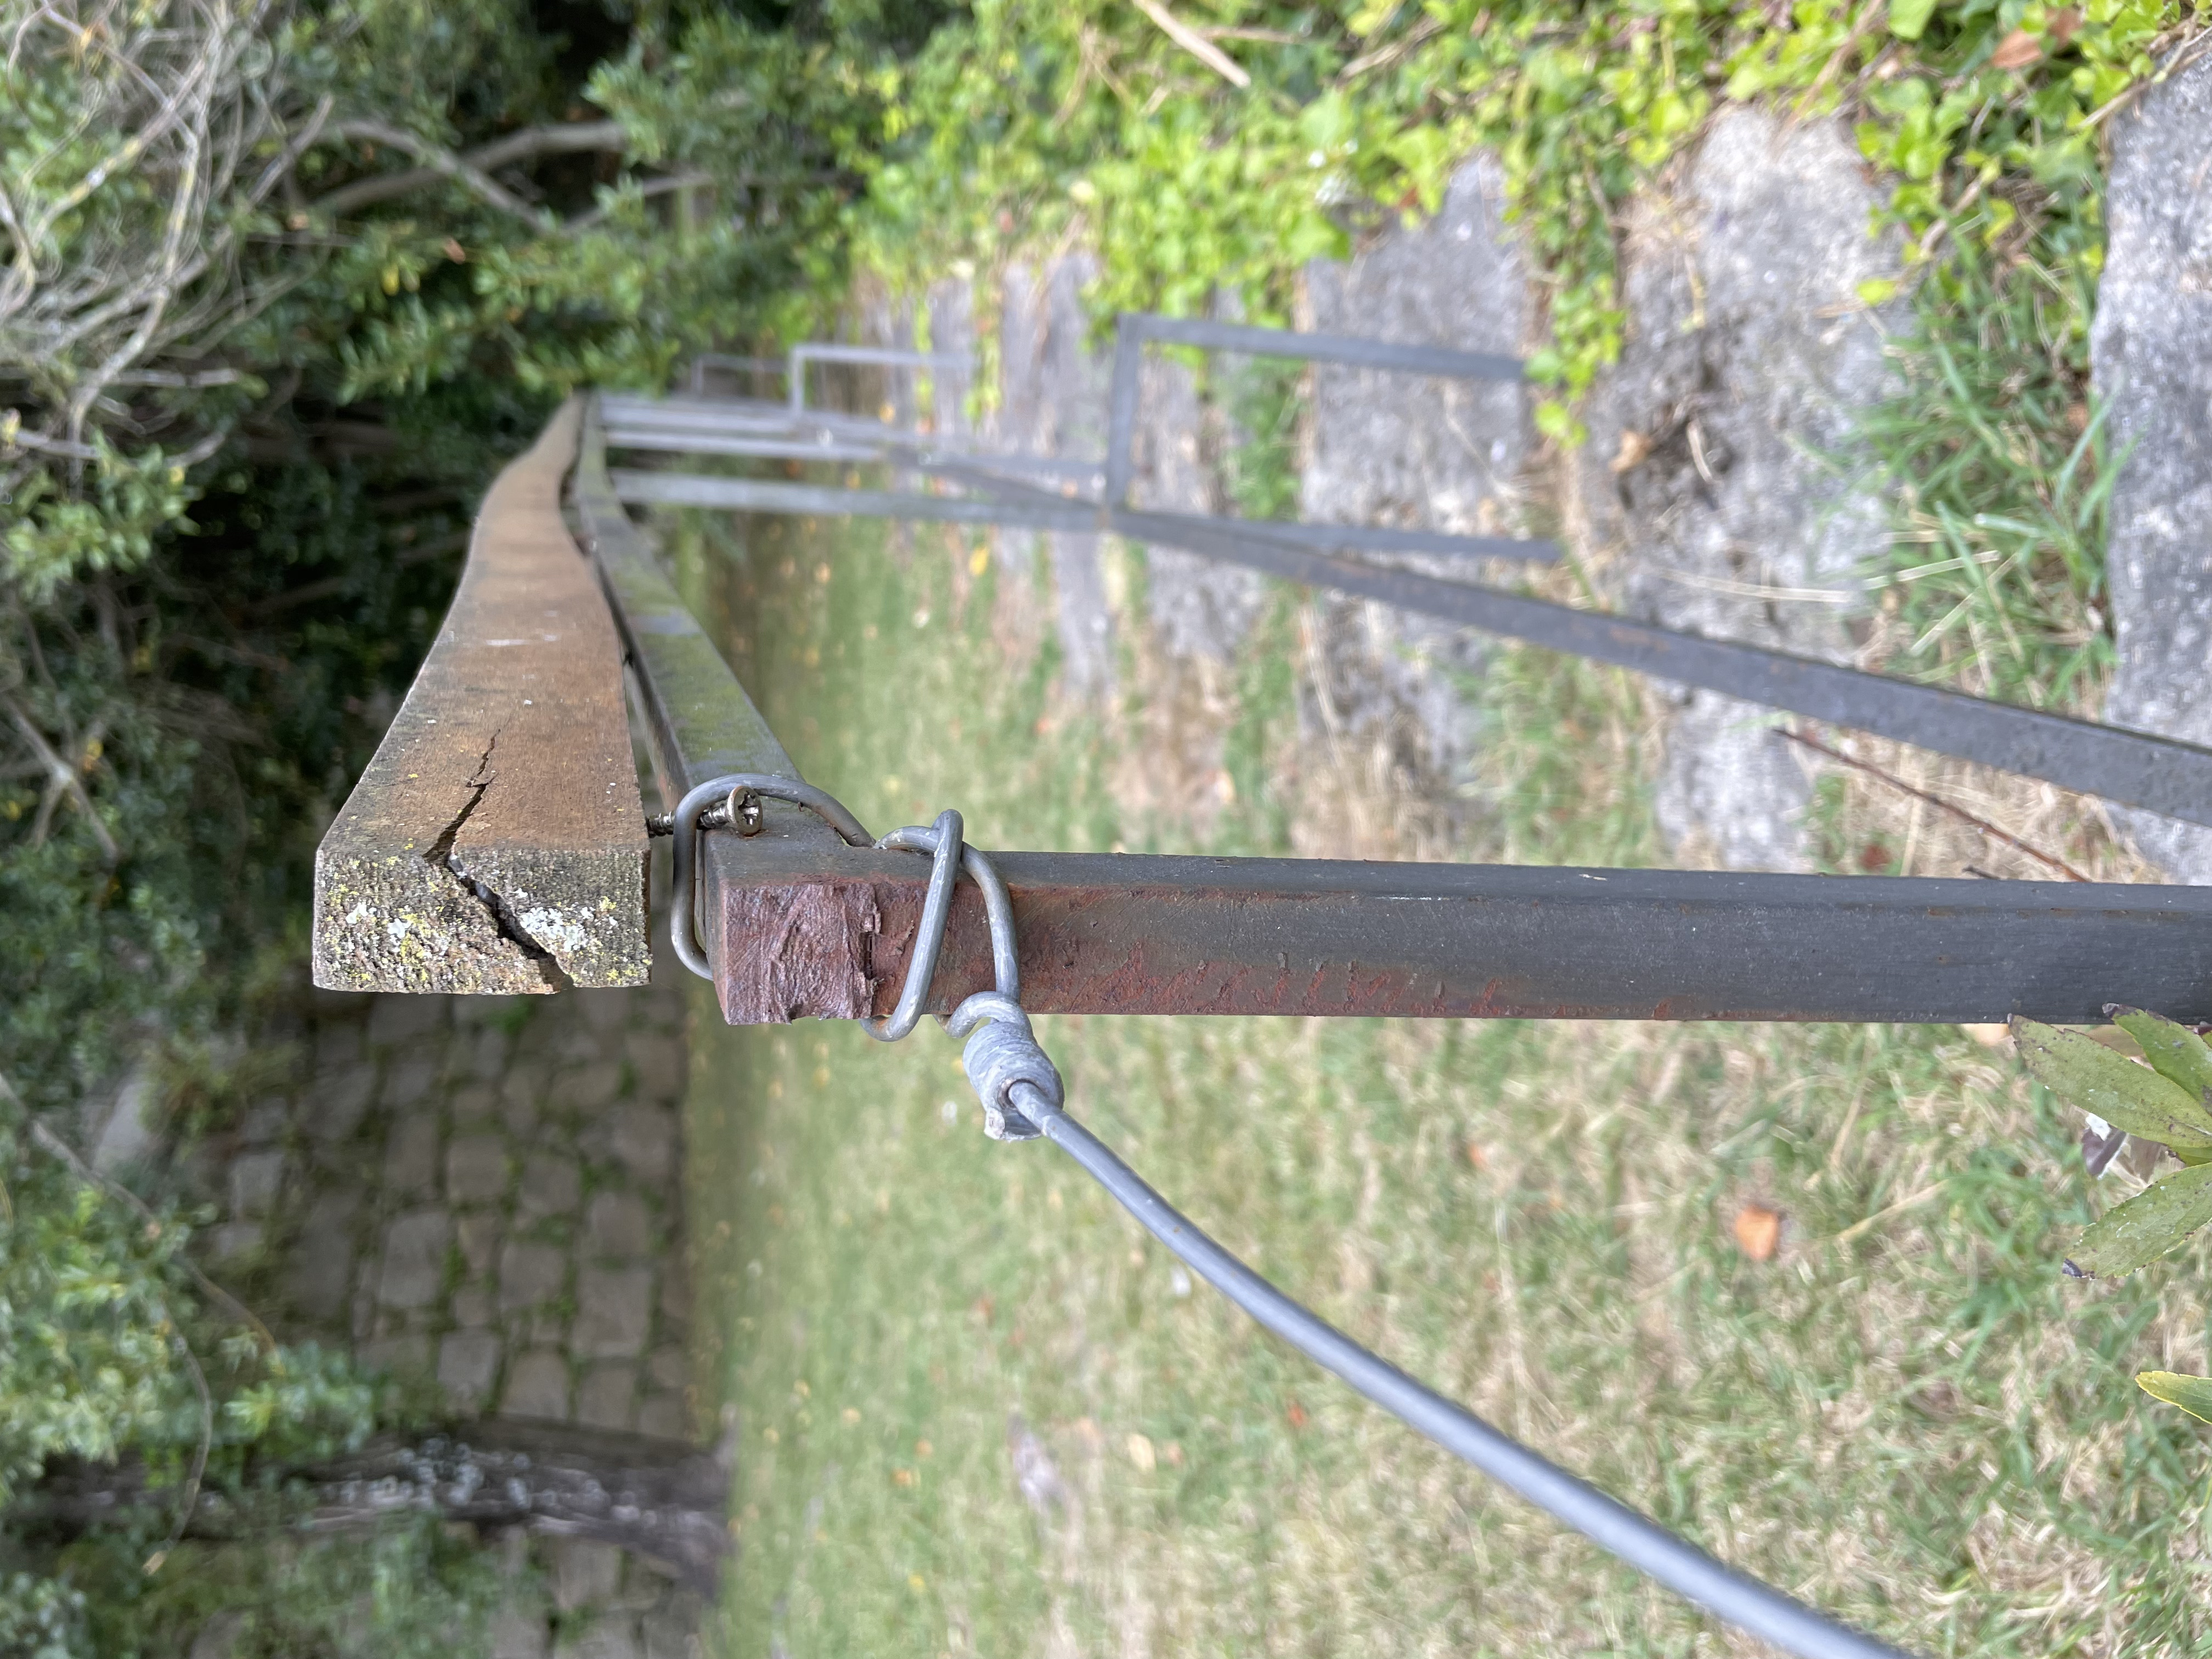 handrail attached with wire and a screw